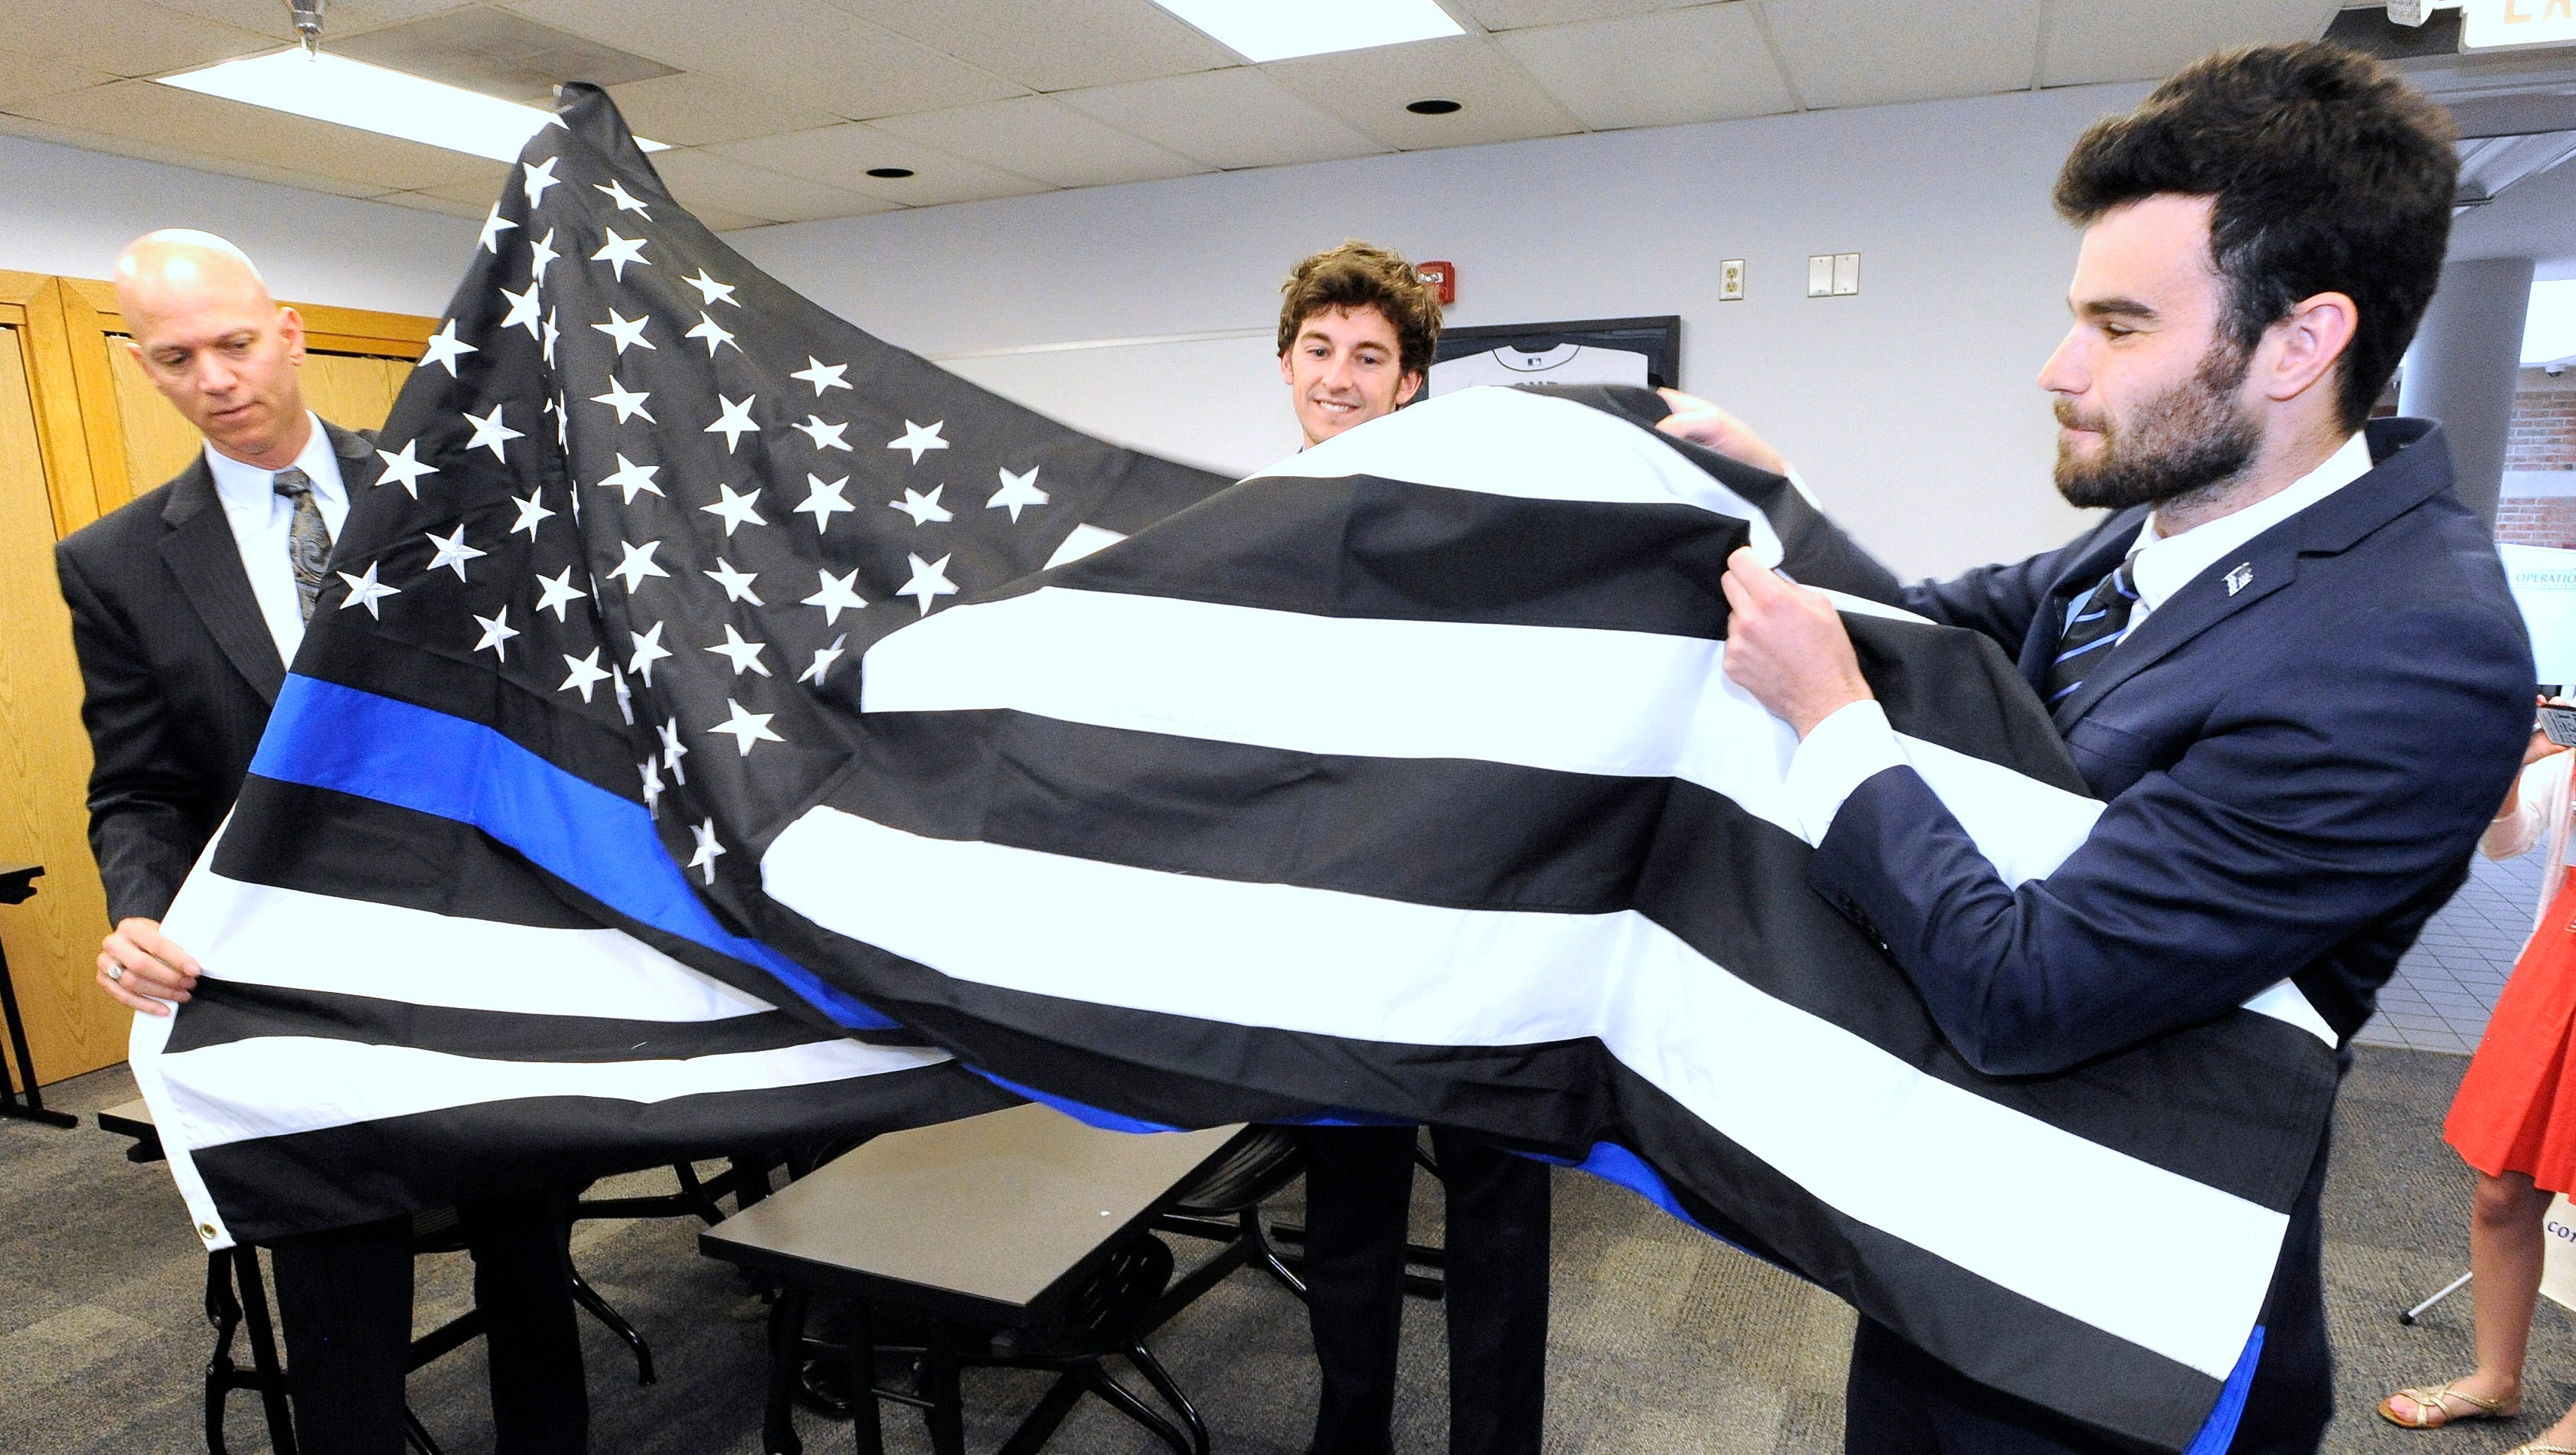 From left, West Bloomfield Twp. deputy chief Curt Lawson, Thin Blue Line vice president Pete Forhan and founder and president Andrew Jacob unfurl this 5-foot by 8-foot Thin Blue Line flag that Jacob presents to Lawson, for the department.